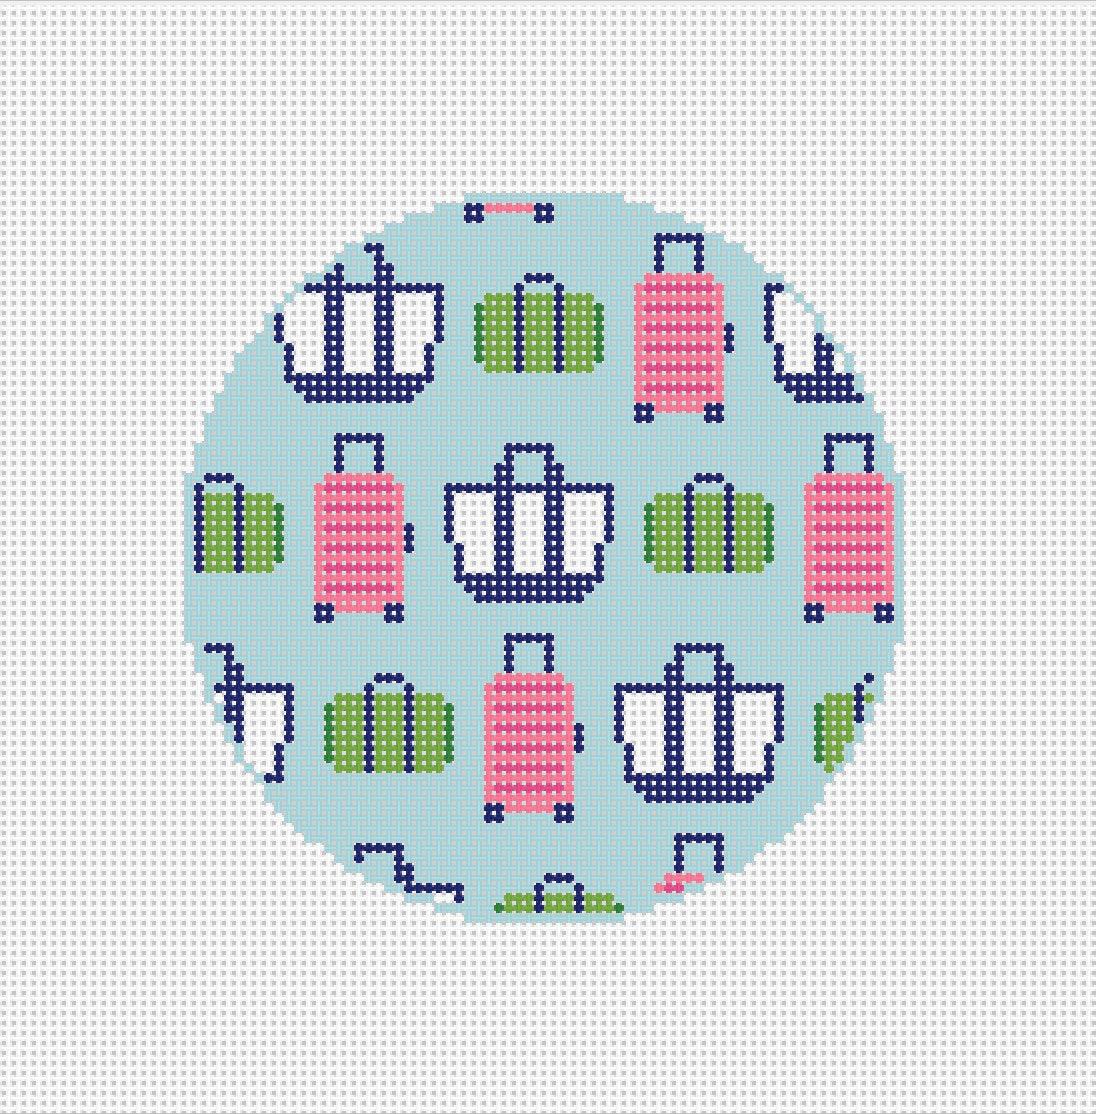 Travel suitcase round - Needlepoint by Laura